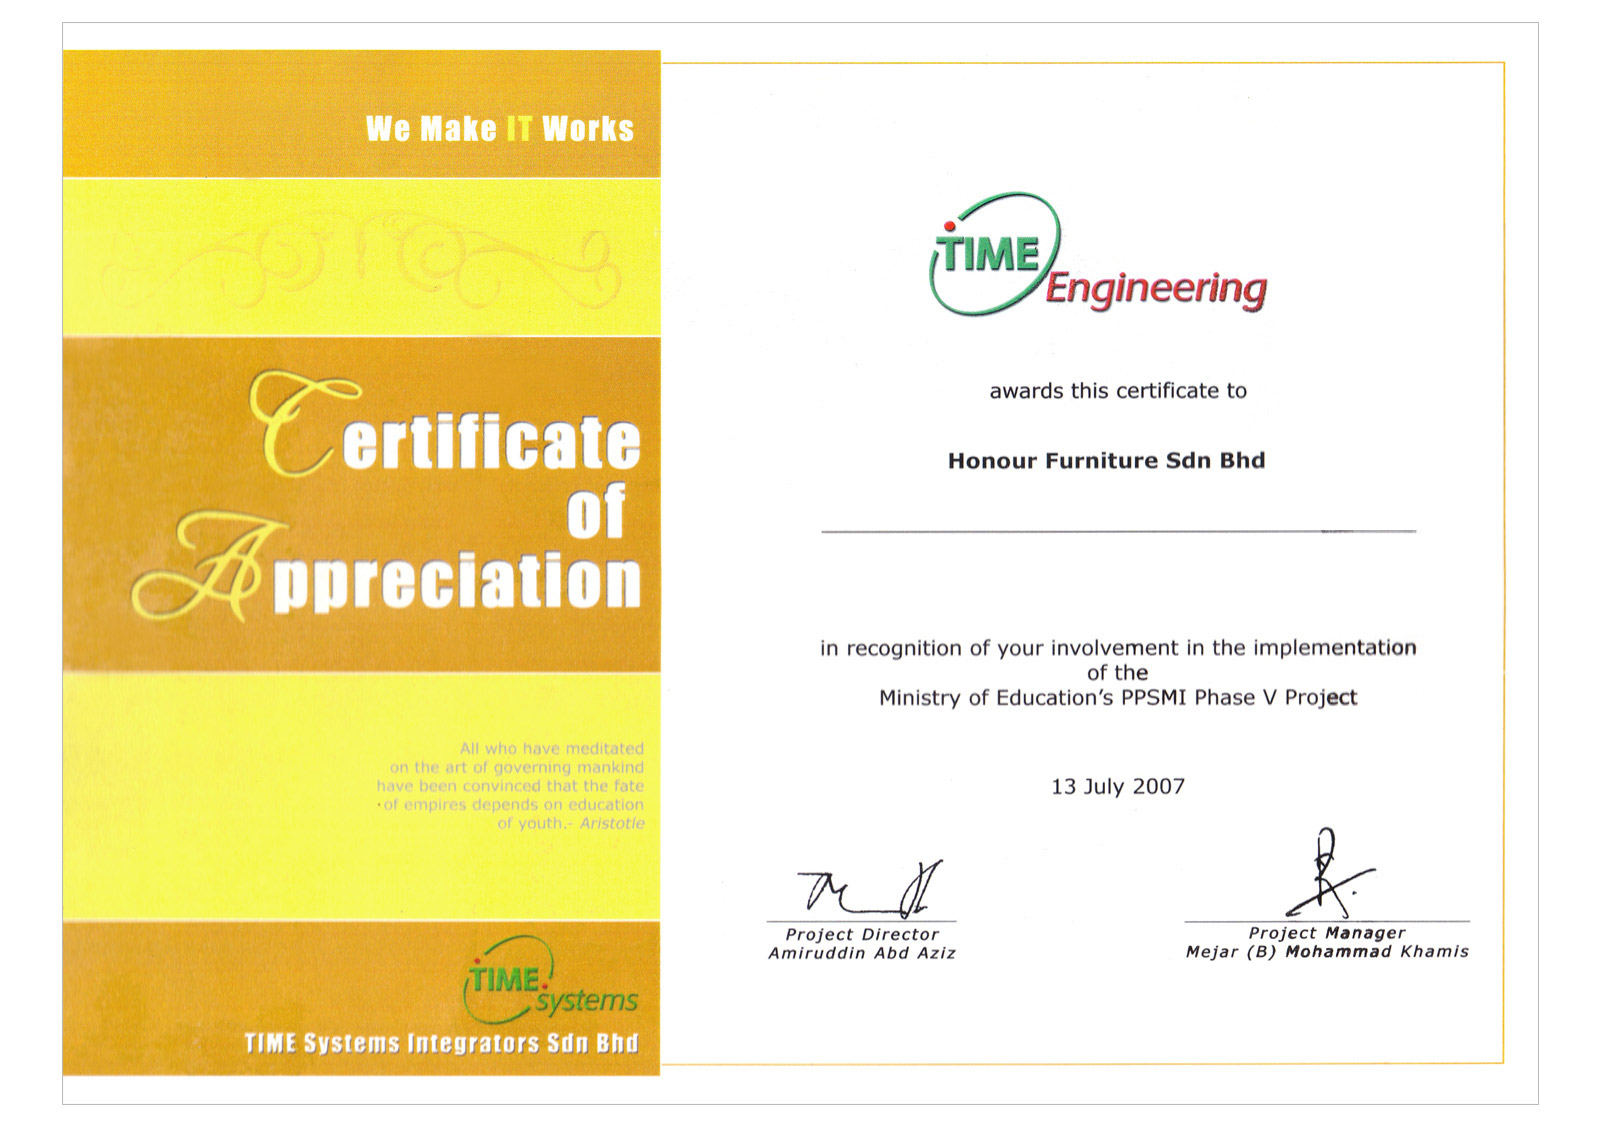 Certificate of Appreciation, Time Engineering